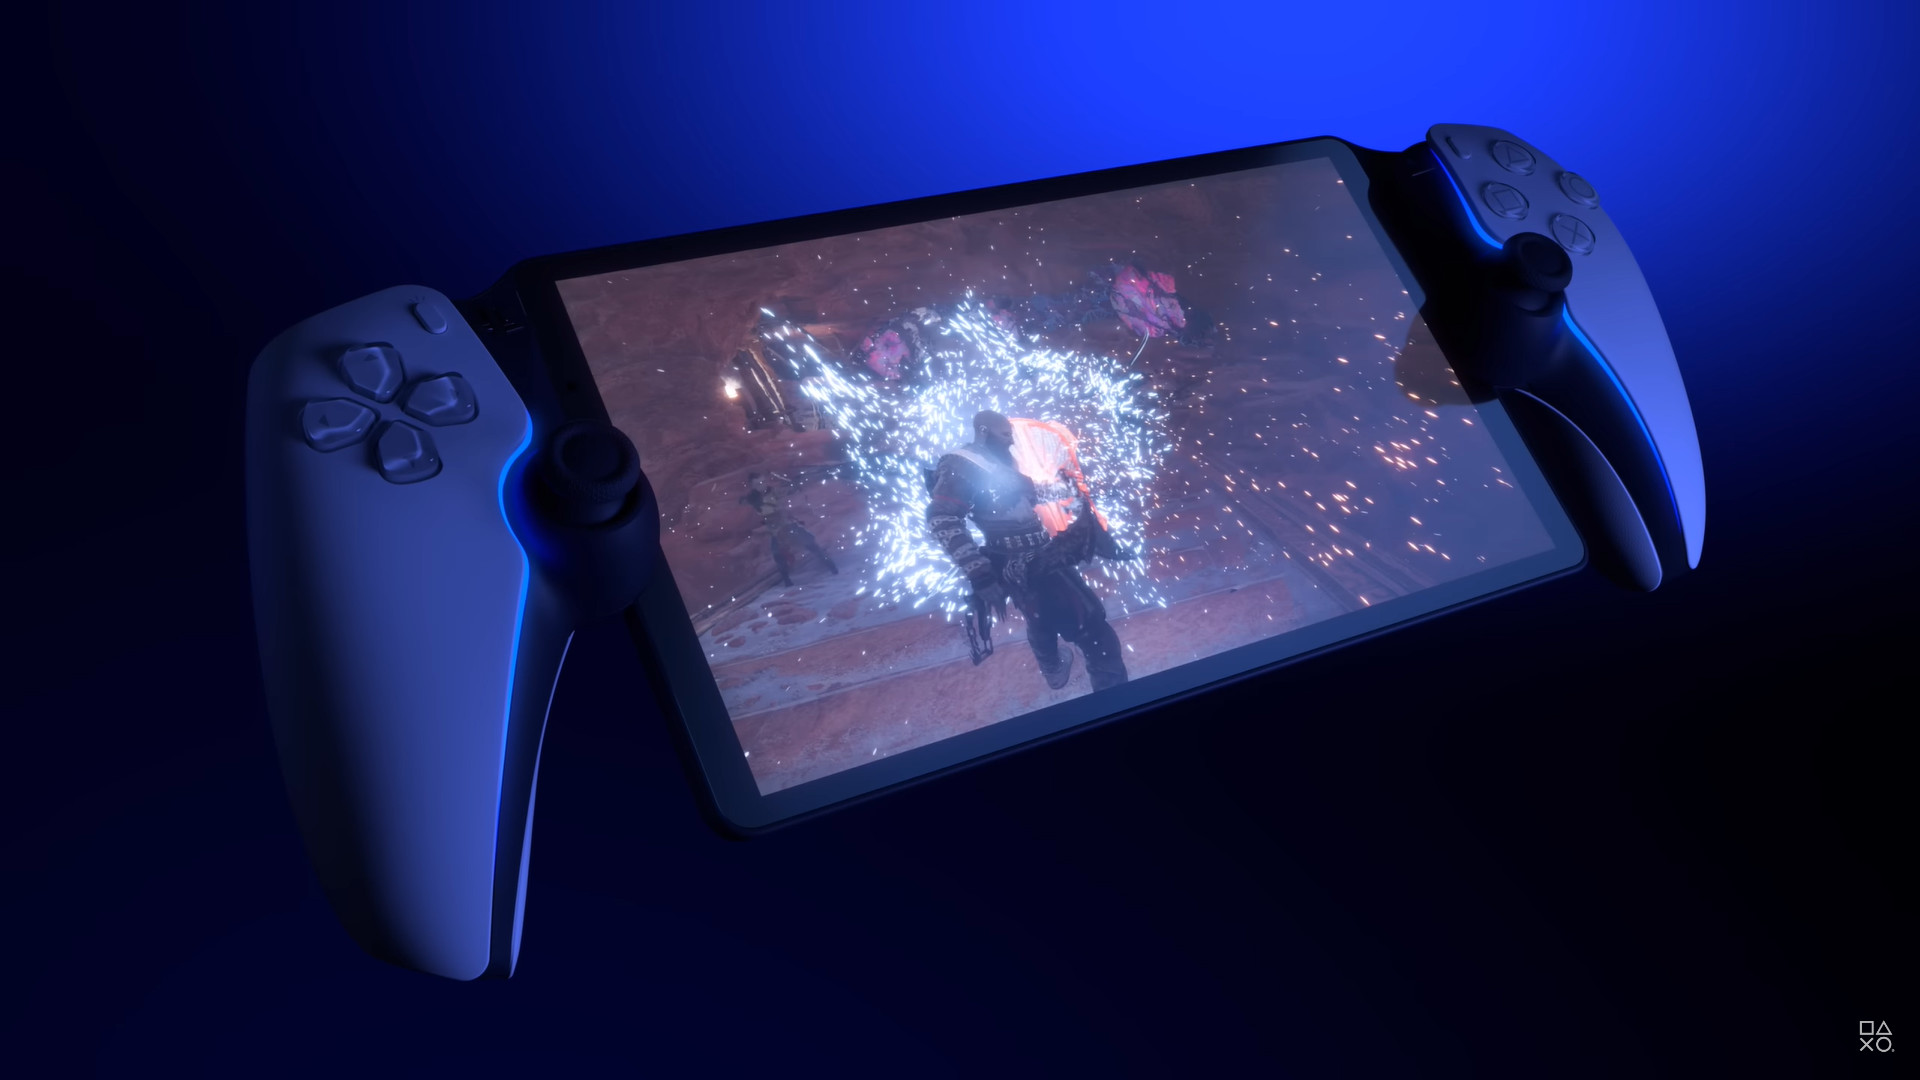 PlayStation Portal: New PS5 Streaming Handheld's Name and Price